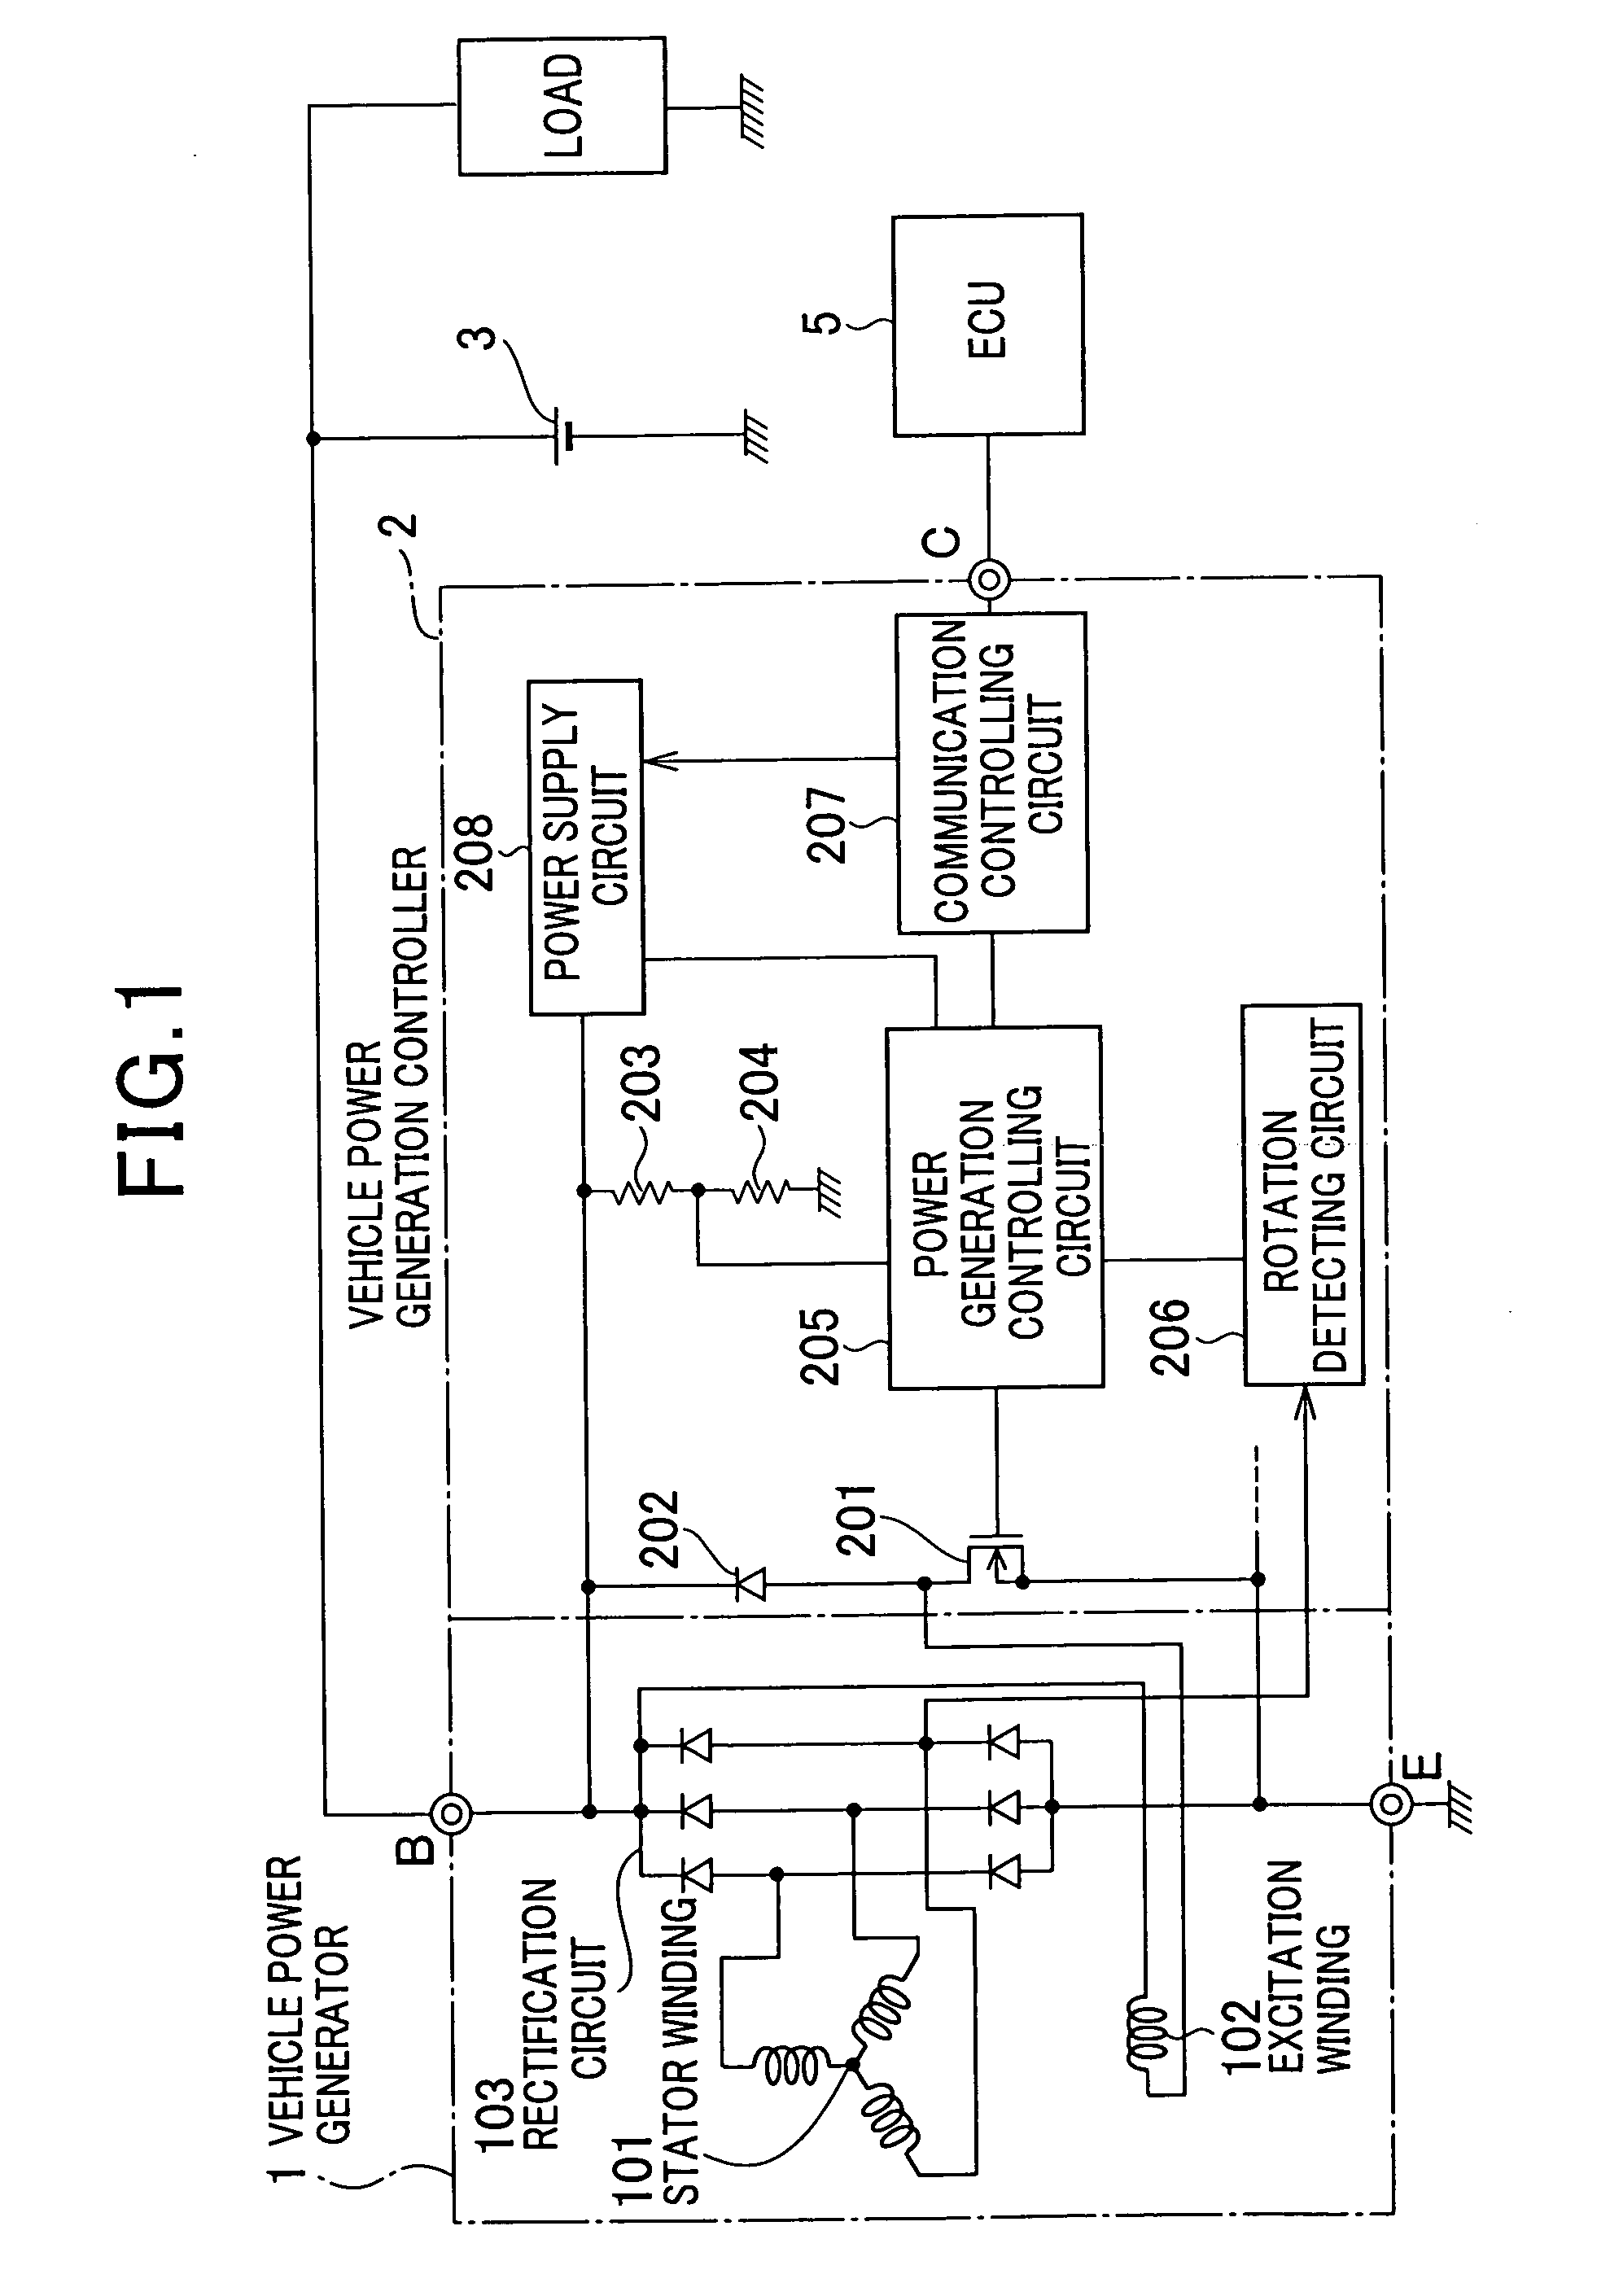 Device for controlling power generated in vehicle